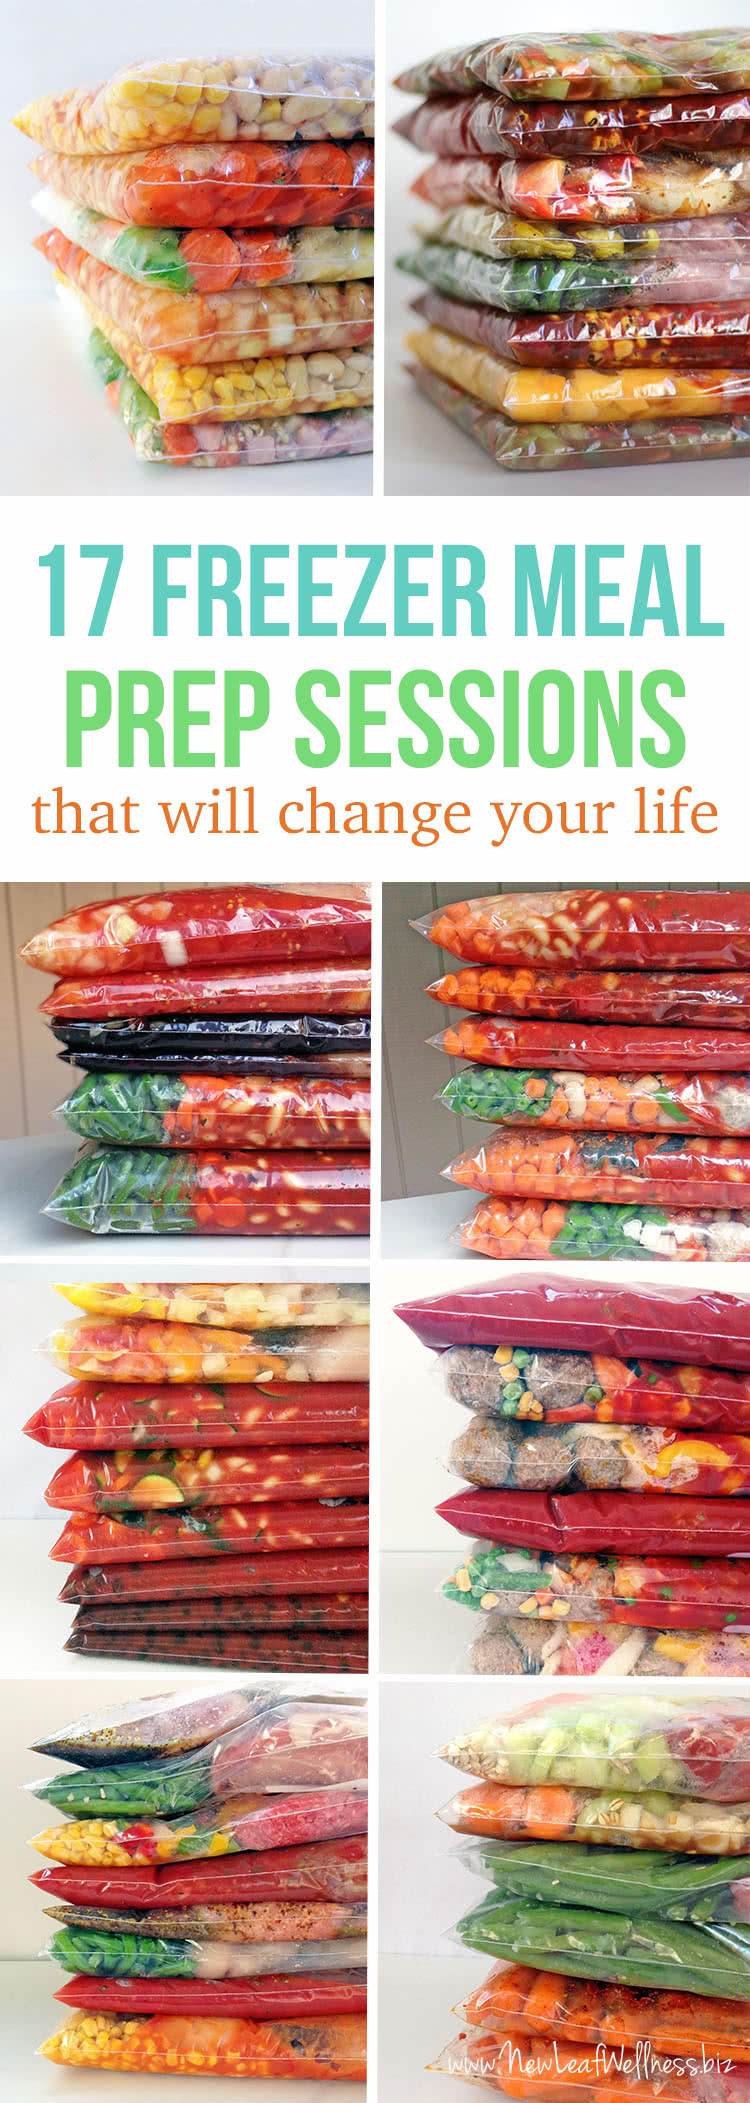 17 Freezer Meal Prep Sessions That Will Change Your Life | The Family ...